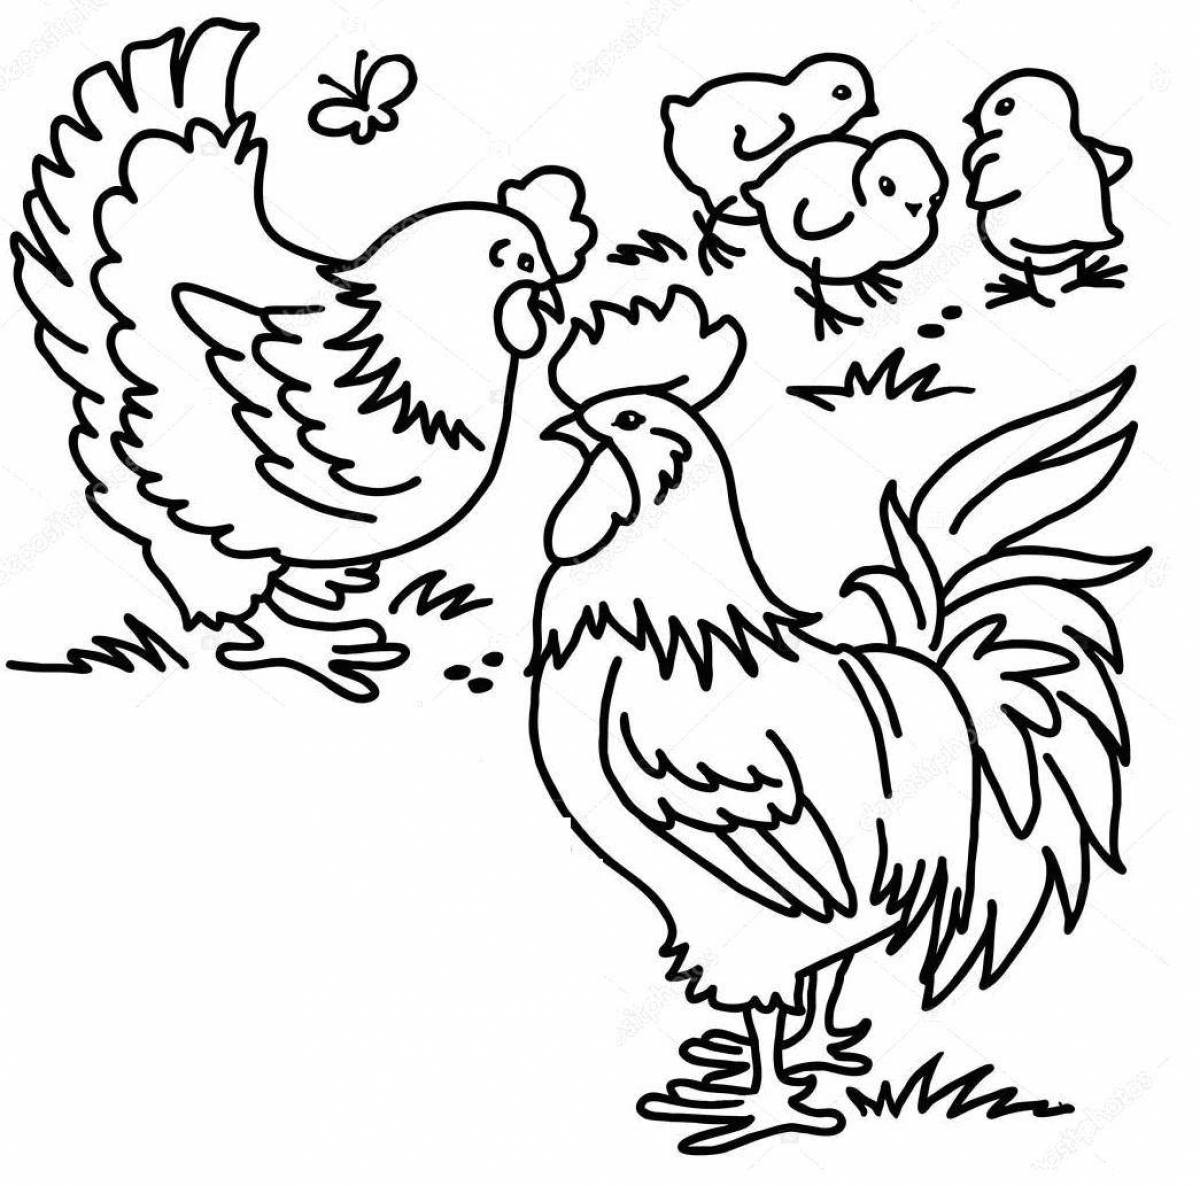 Exciting rooster coloring for kids